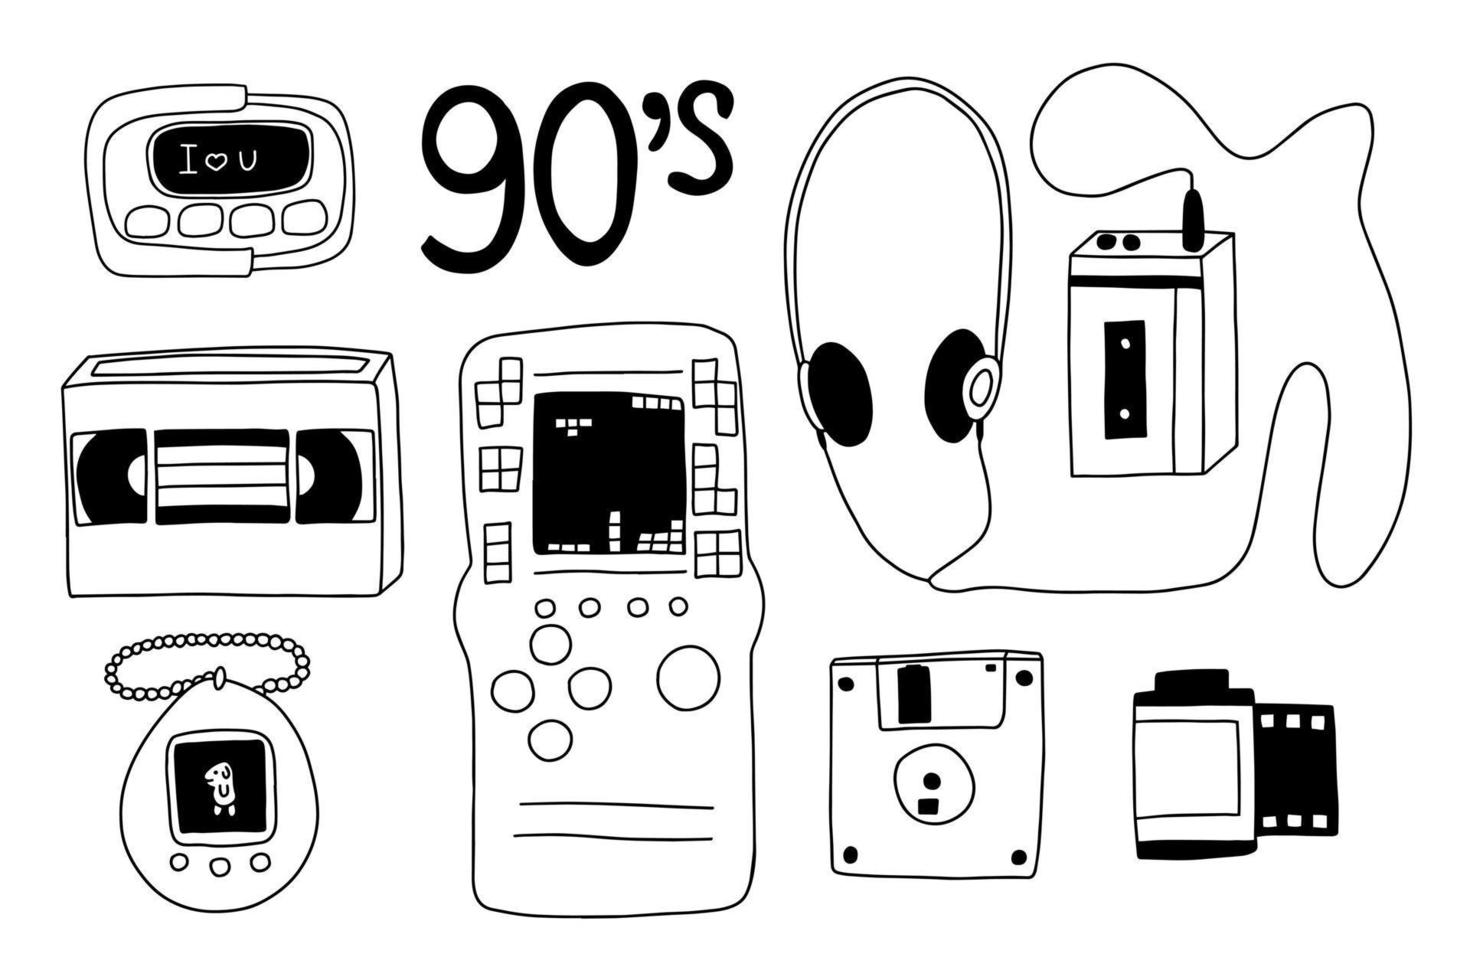 90's retro doodle objects illustration set. Vector cassette player, tamagotchi and floppy disk hand drawn clip art